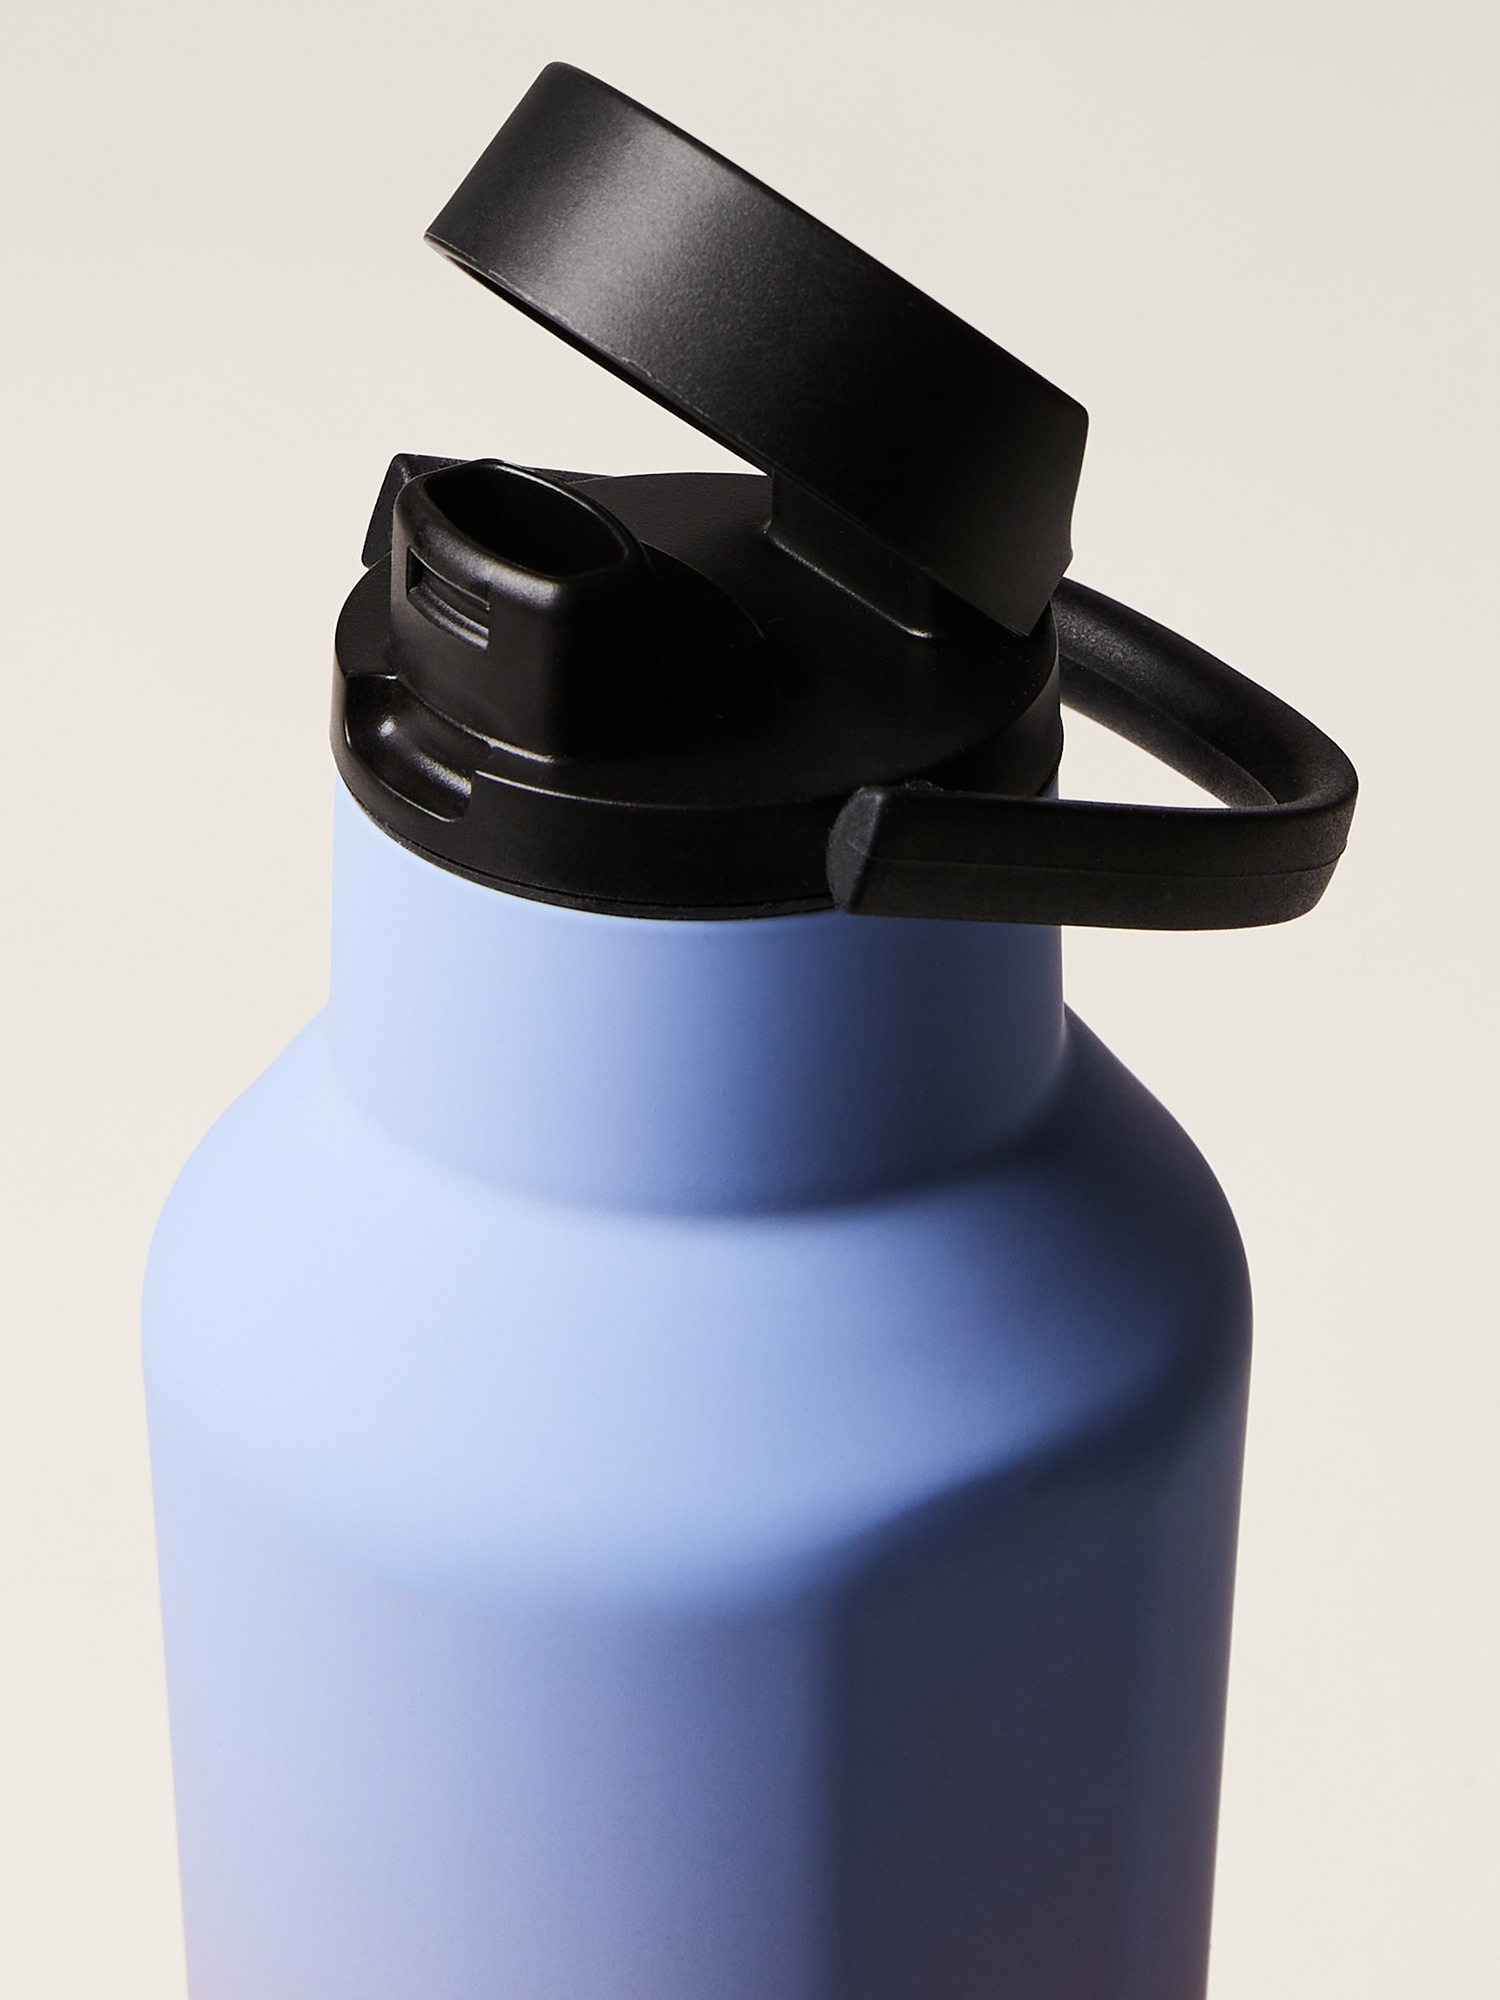  Corkcicle Insulated Canteen Travel Water Bottle